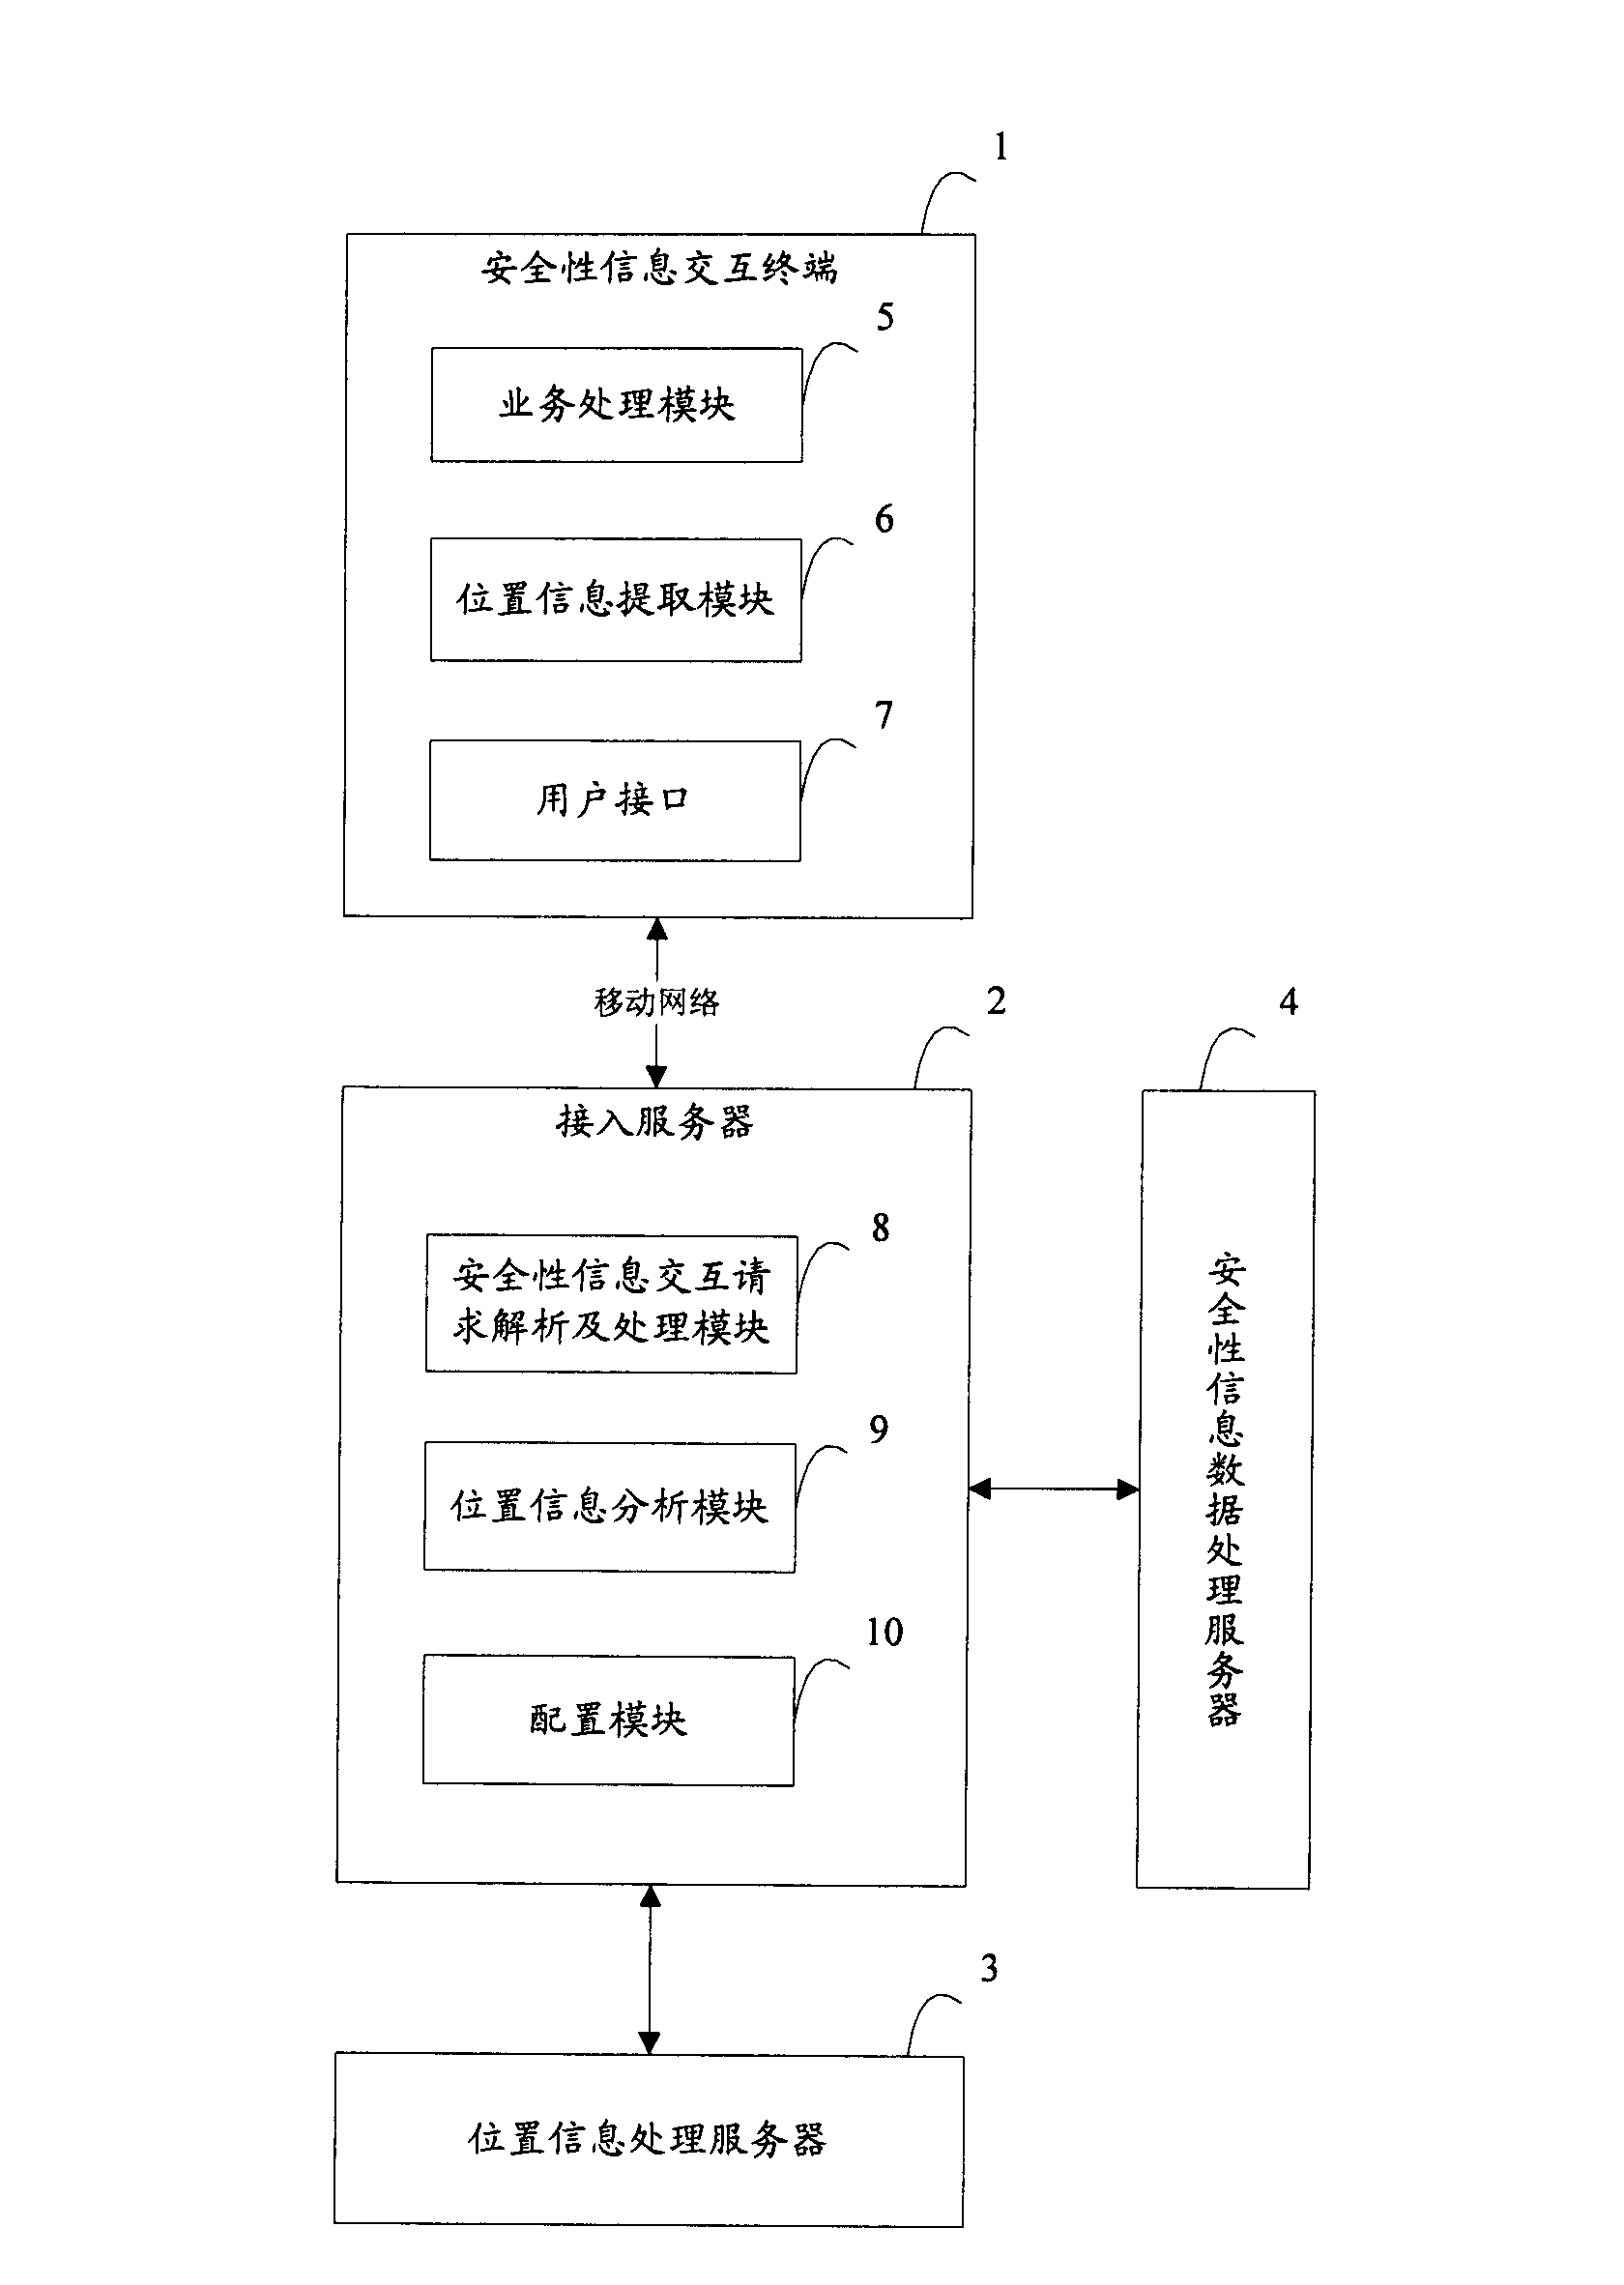 Terminal, server, system and method used for safety information interaction